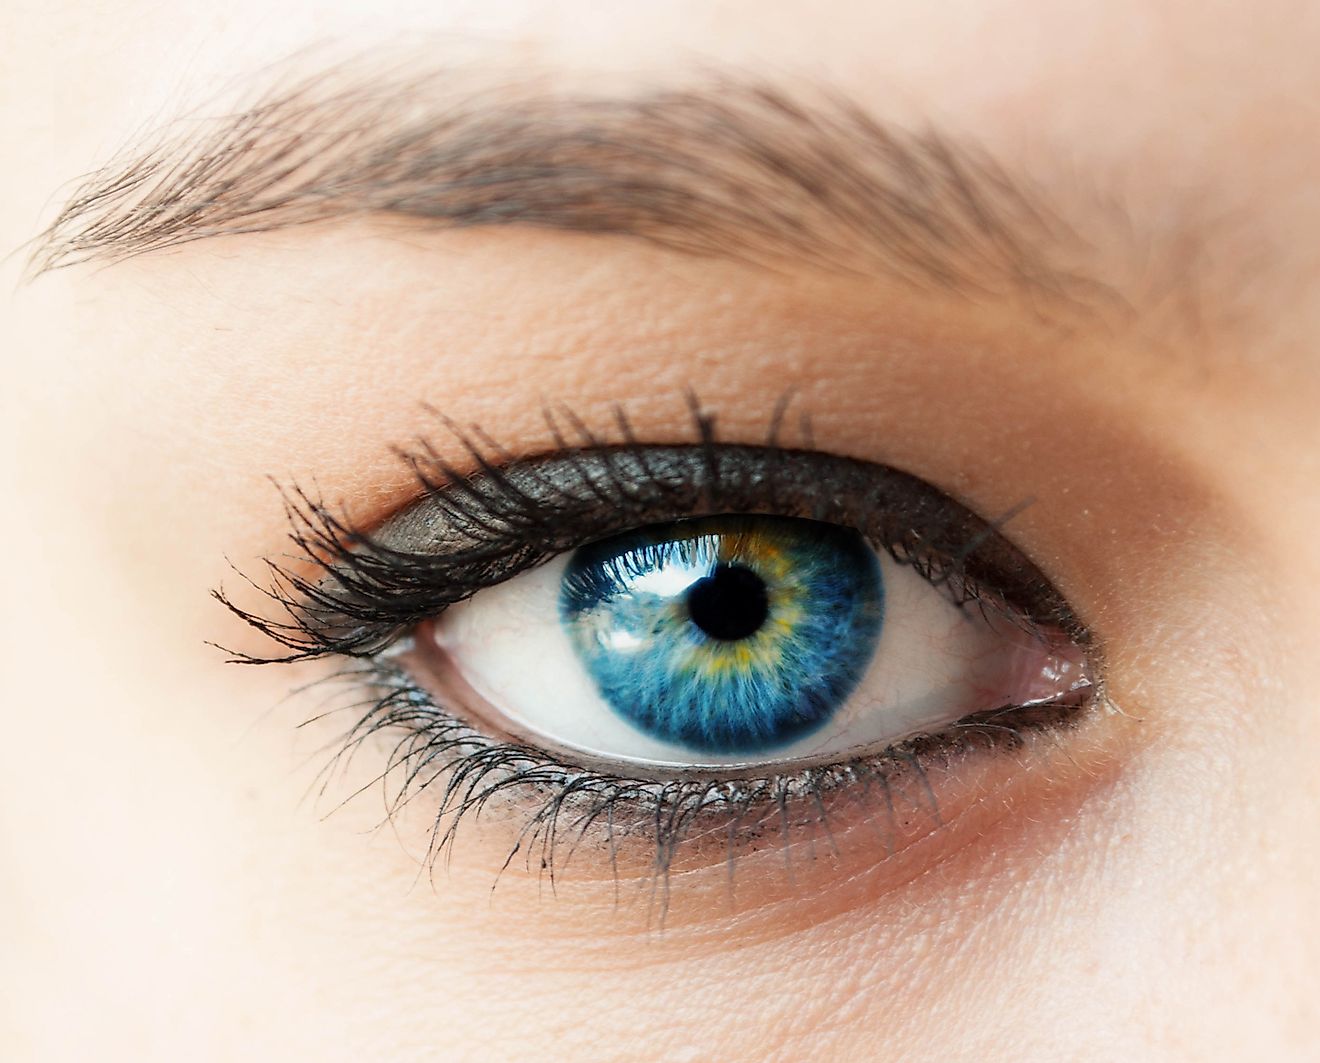 Super Fascinating Facts About The Human Eye You Probably Don't Know